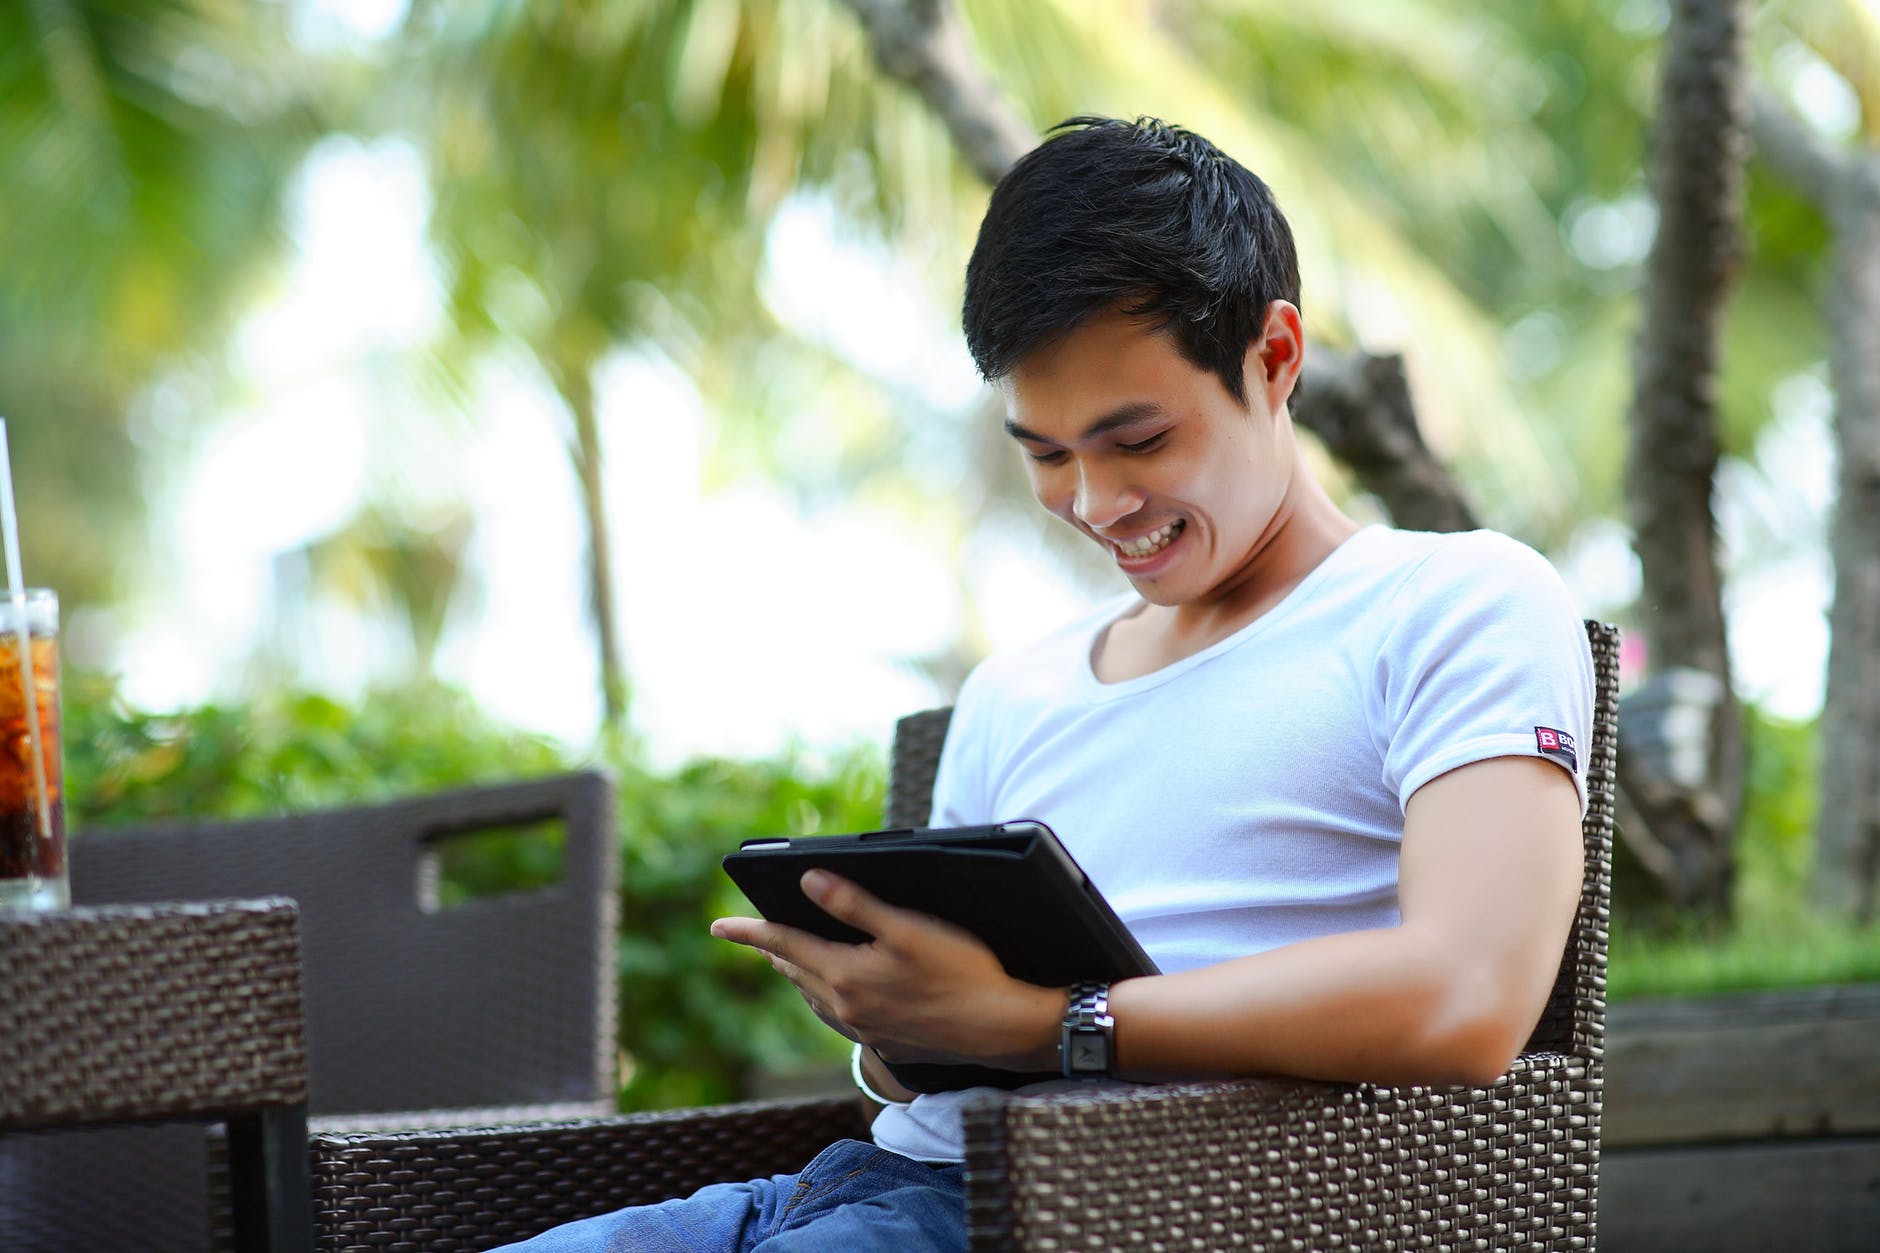 Smiling man sitting outside looking at tablet PC